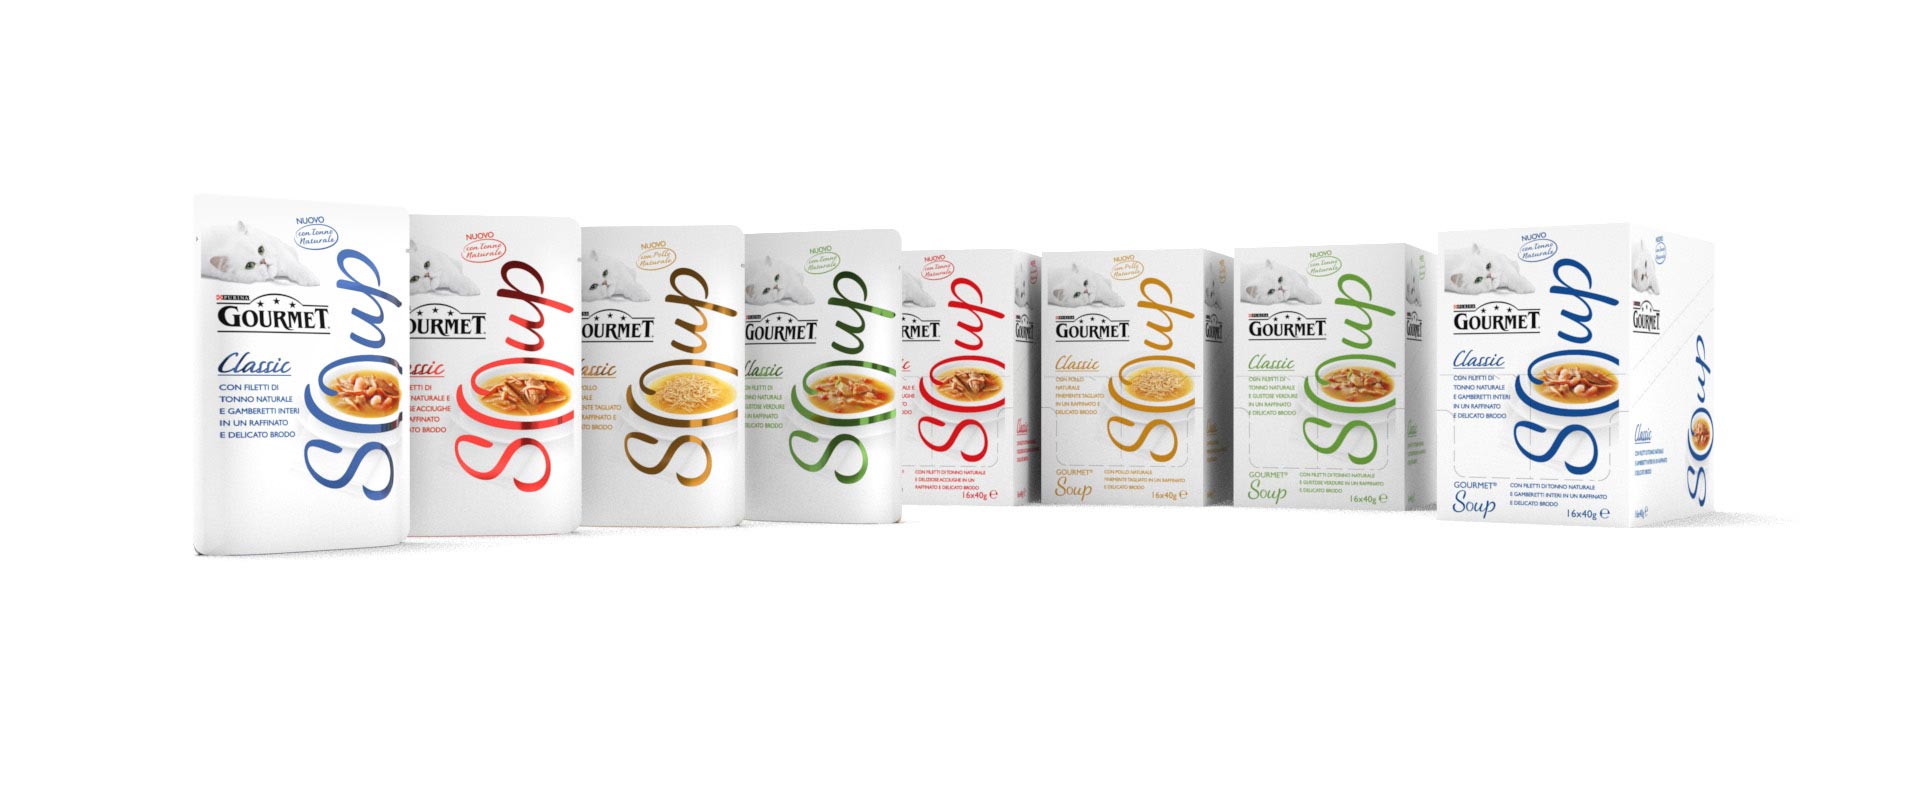 graphic design launch packaging gourmet soup